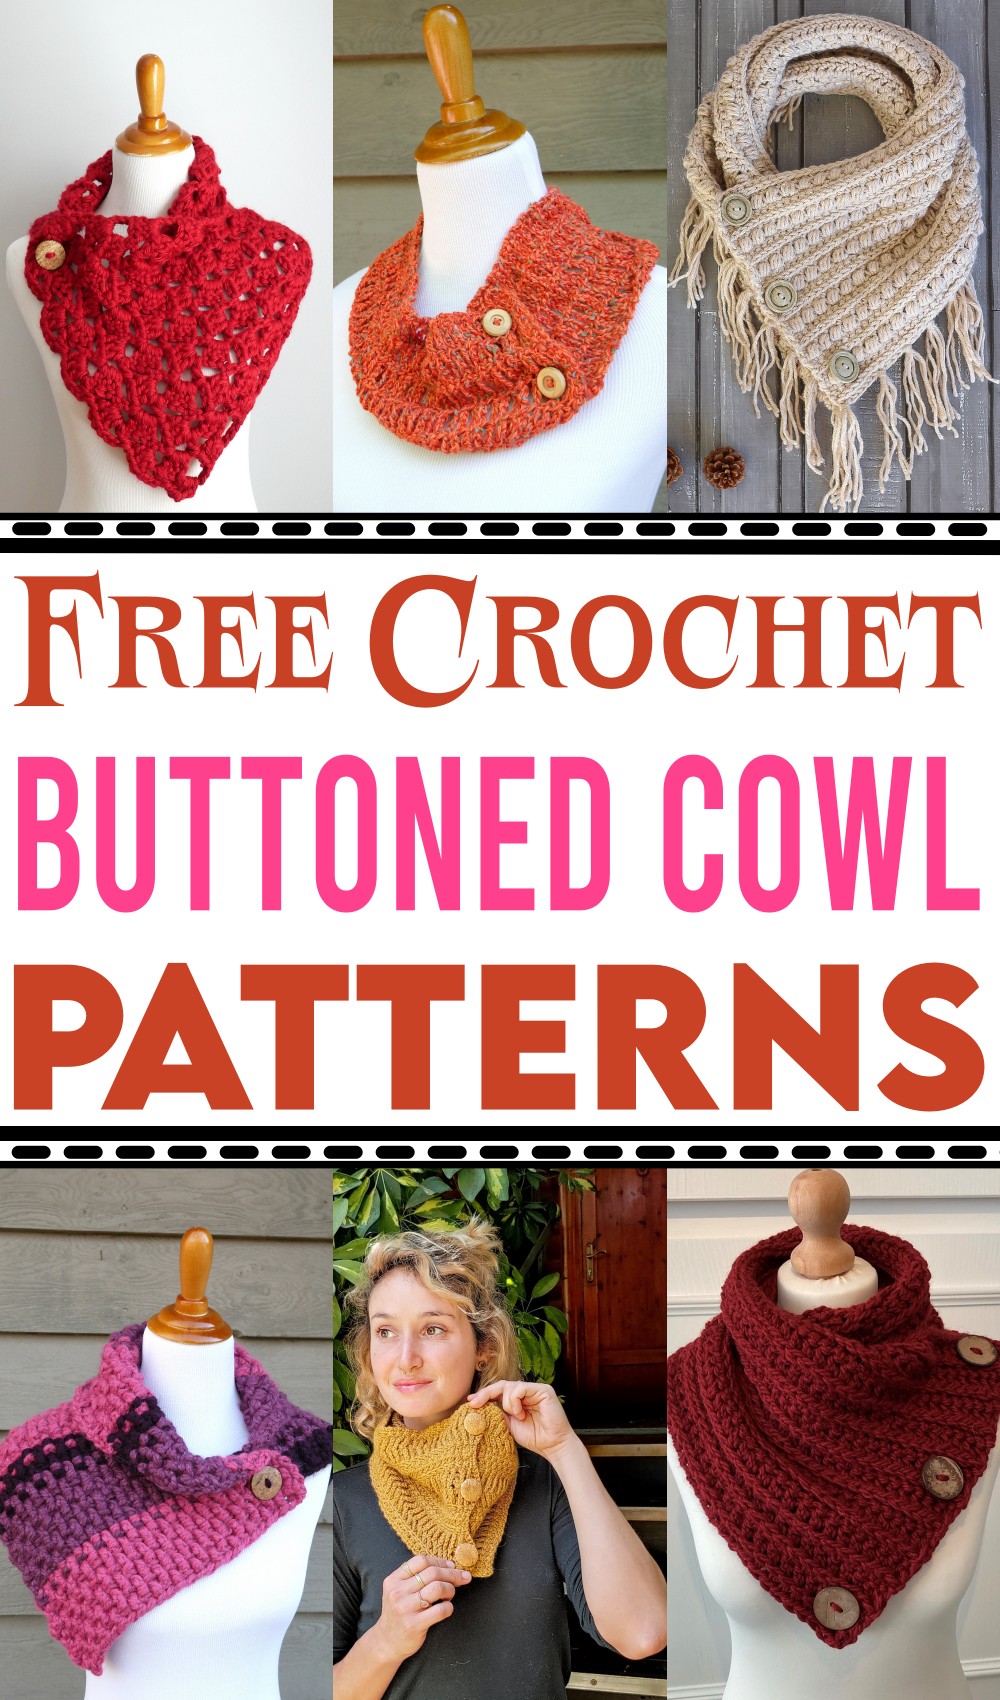 Free Crochet Buttoned Cowl Patterns